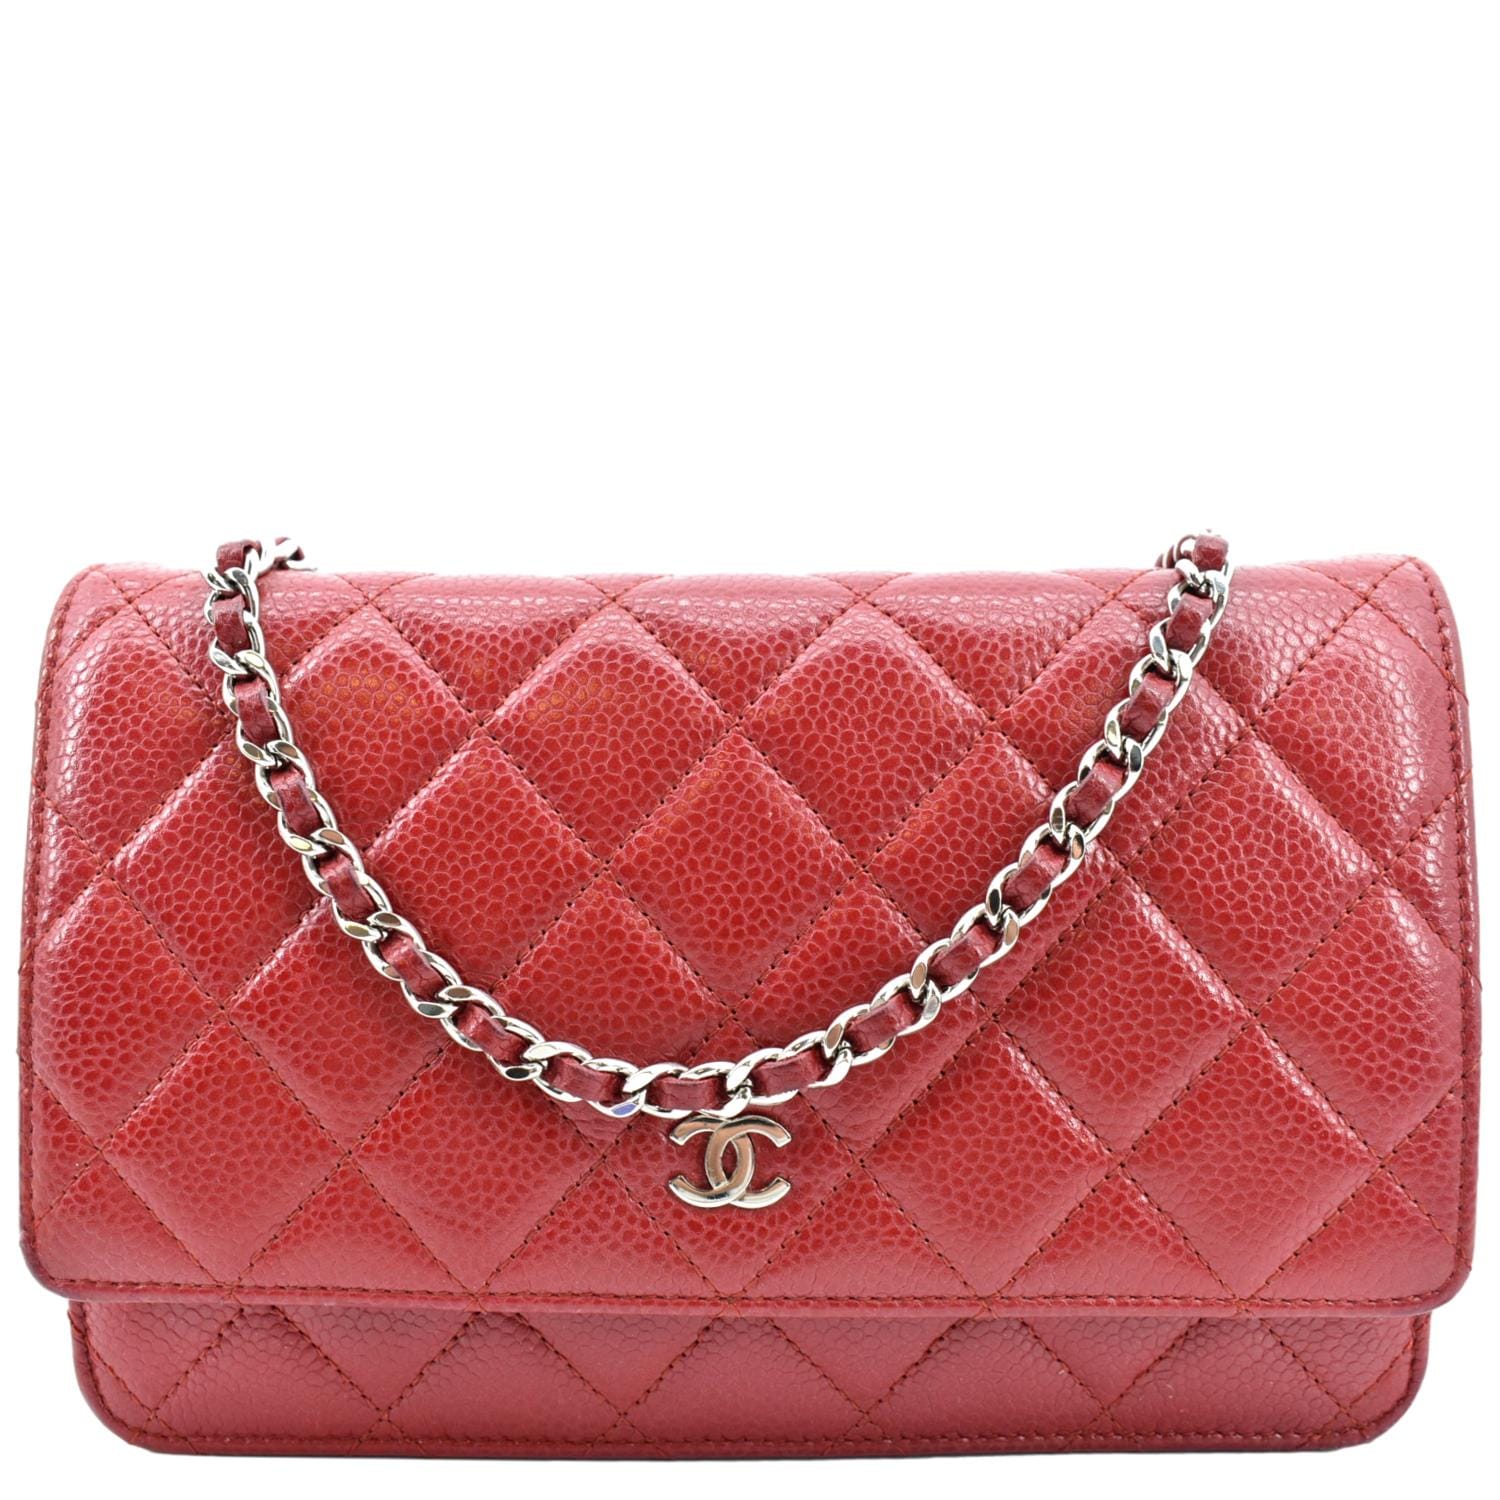 Chanel Caviar Maxi Double Flap Bag Red RHW  DESIGNER TAKEAWAY BY QUEEN OF  LUXURY BOUTIQUE INC